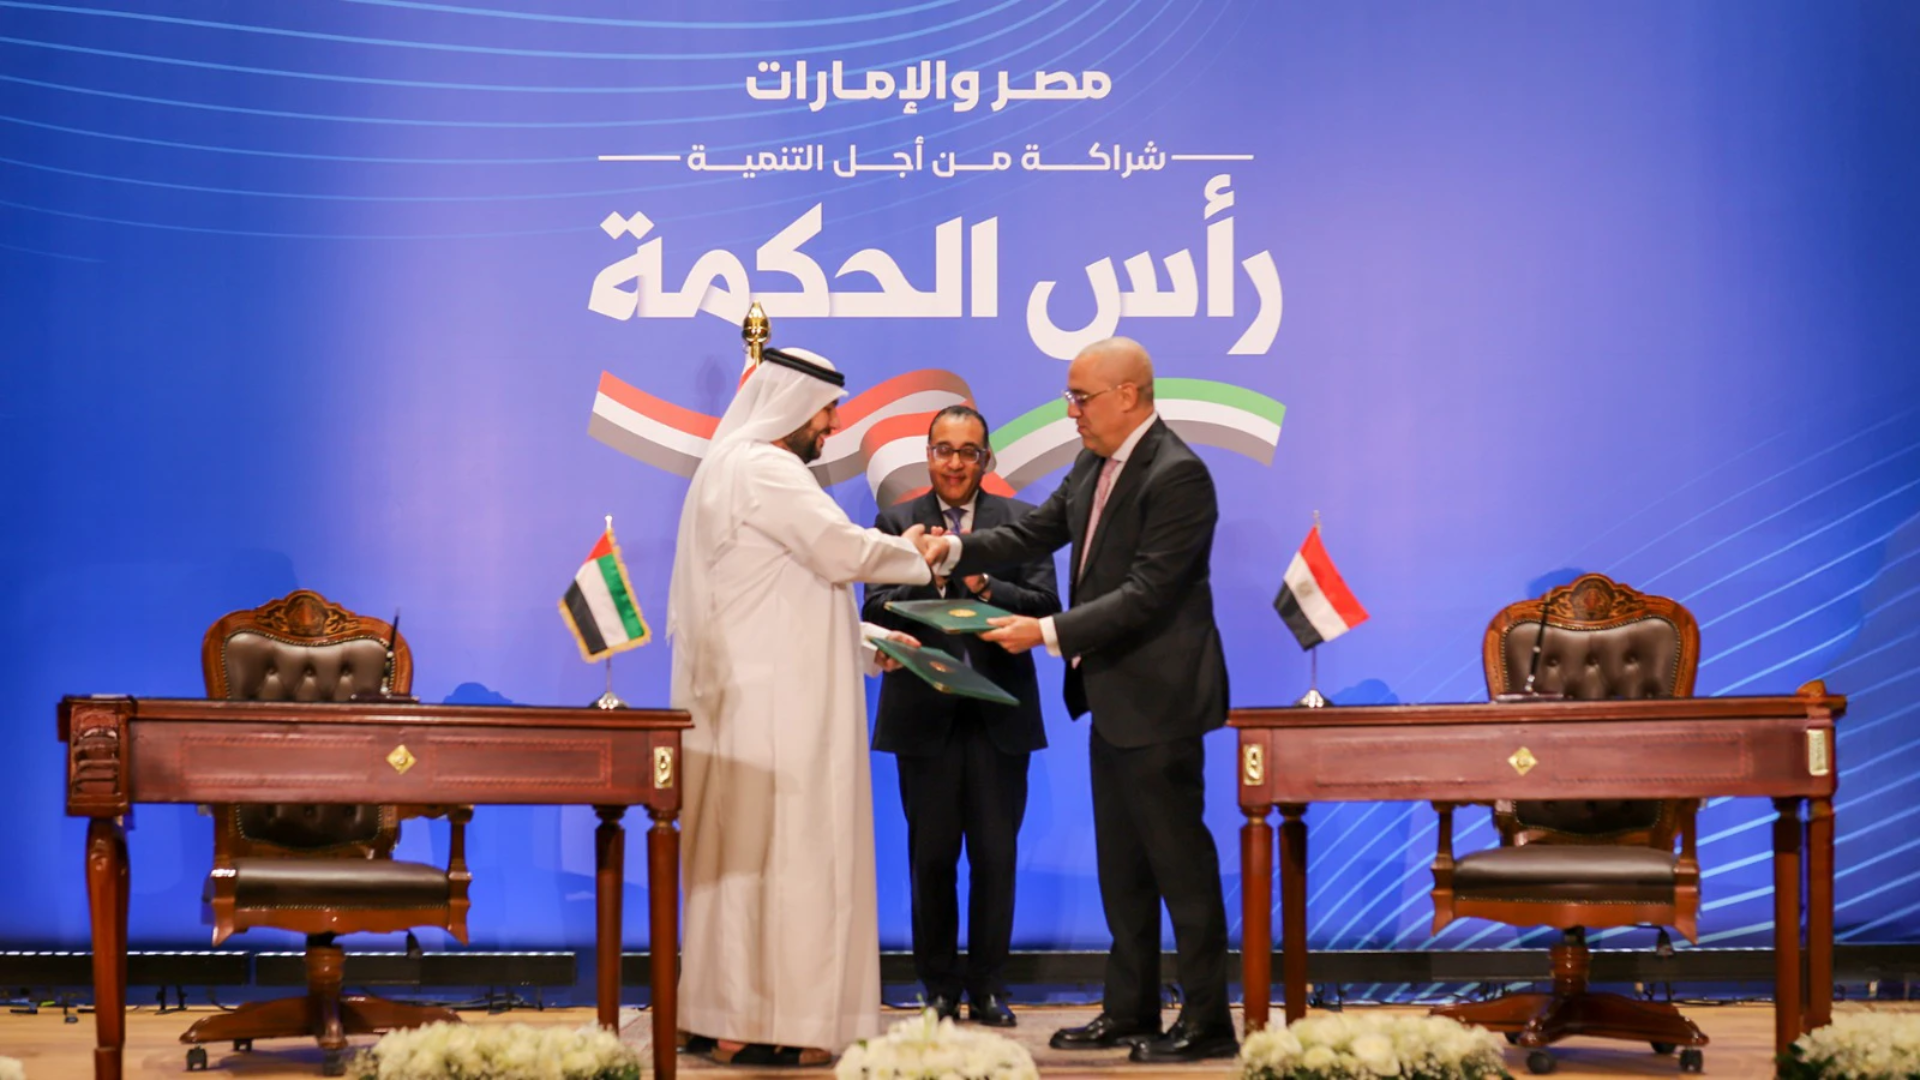 UAE’s ADQ to Invest $35 Billion in Egypt’s Ras El-Hekma, Marking Largest Foreign Direct Investment in Country’s History